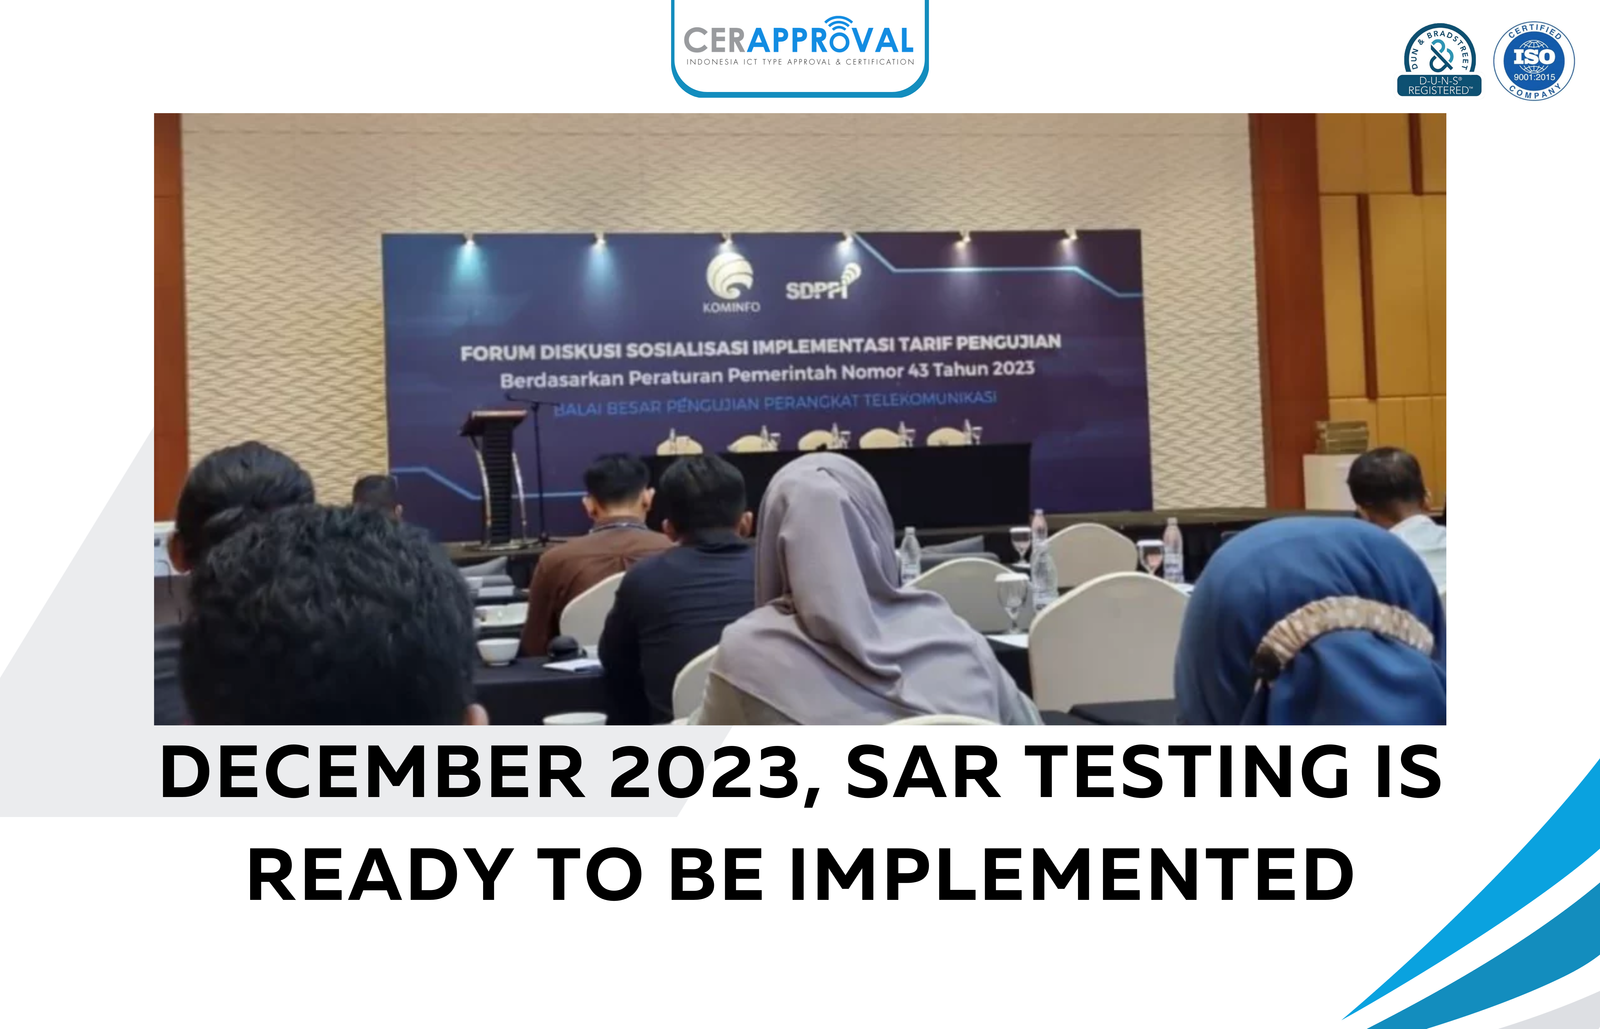 DECEMBER 2023, SAR TESTING IS READY TO BE IMPLEMENTED